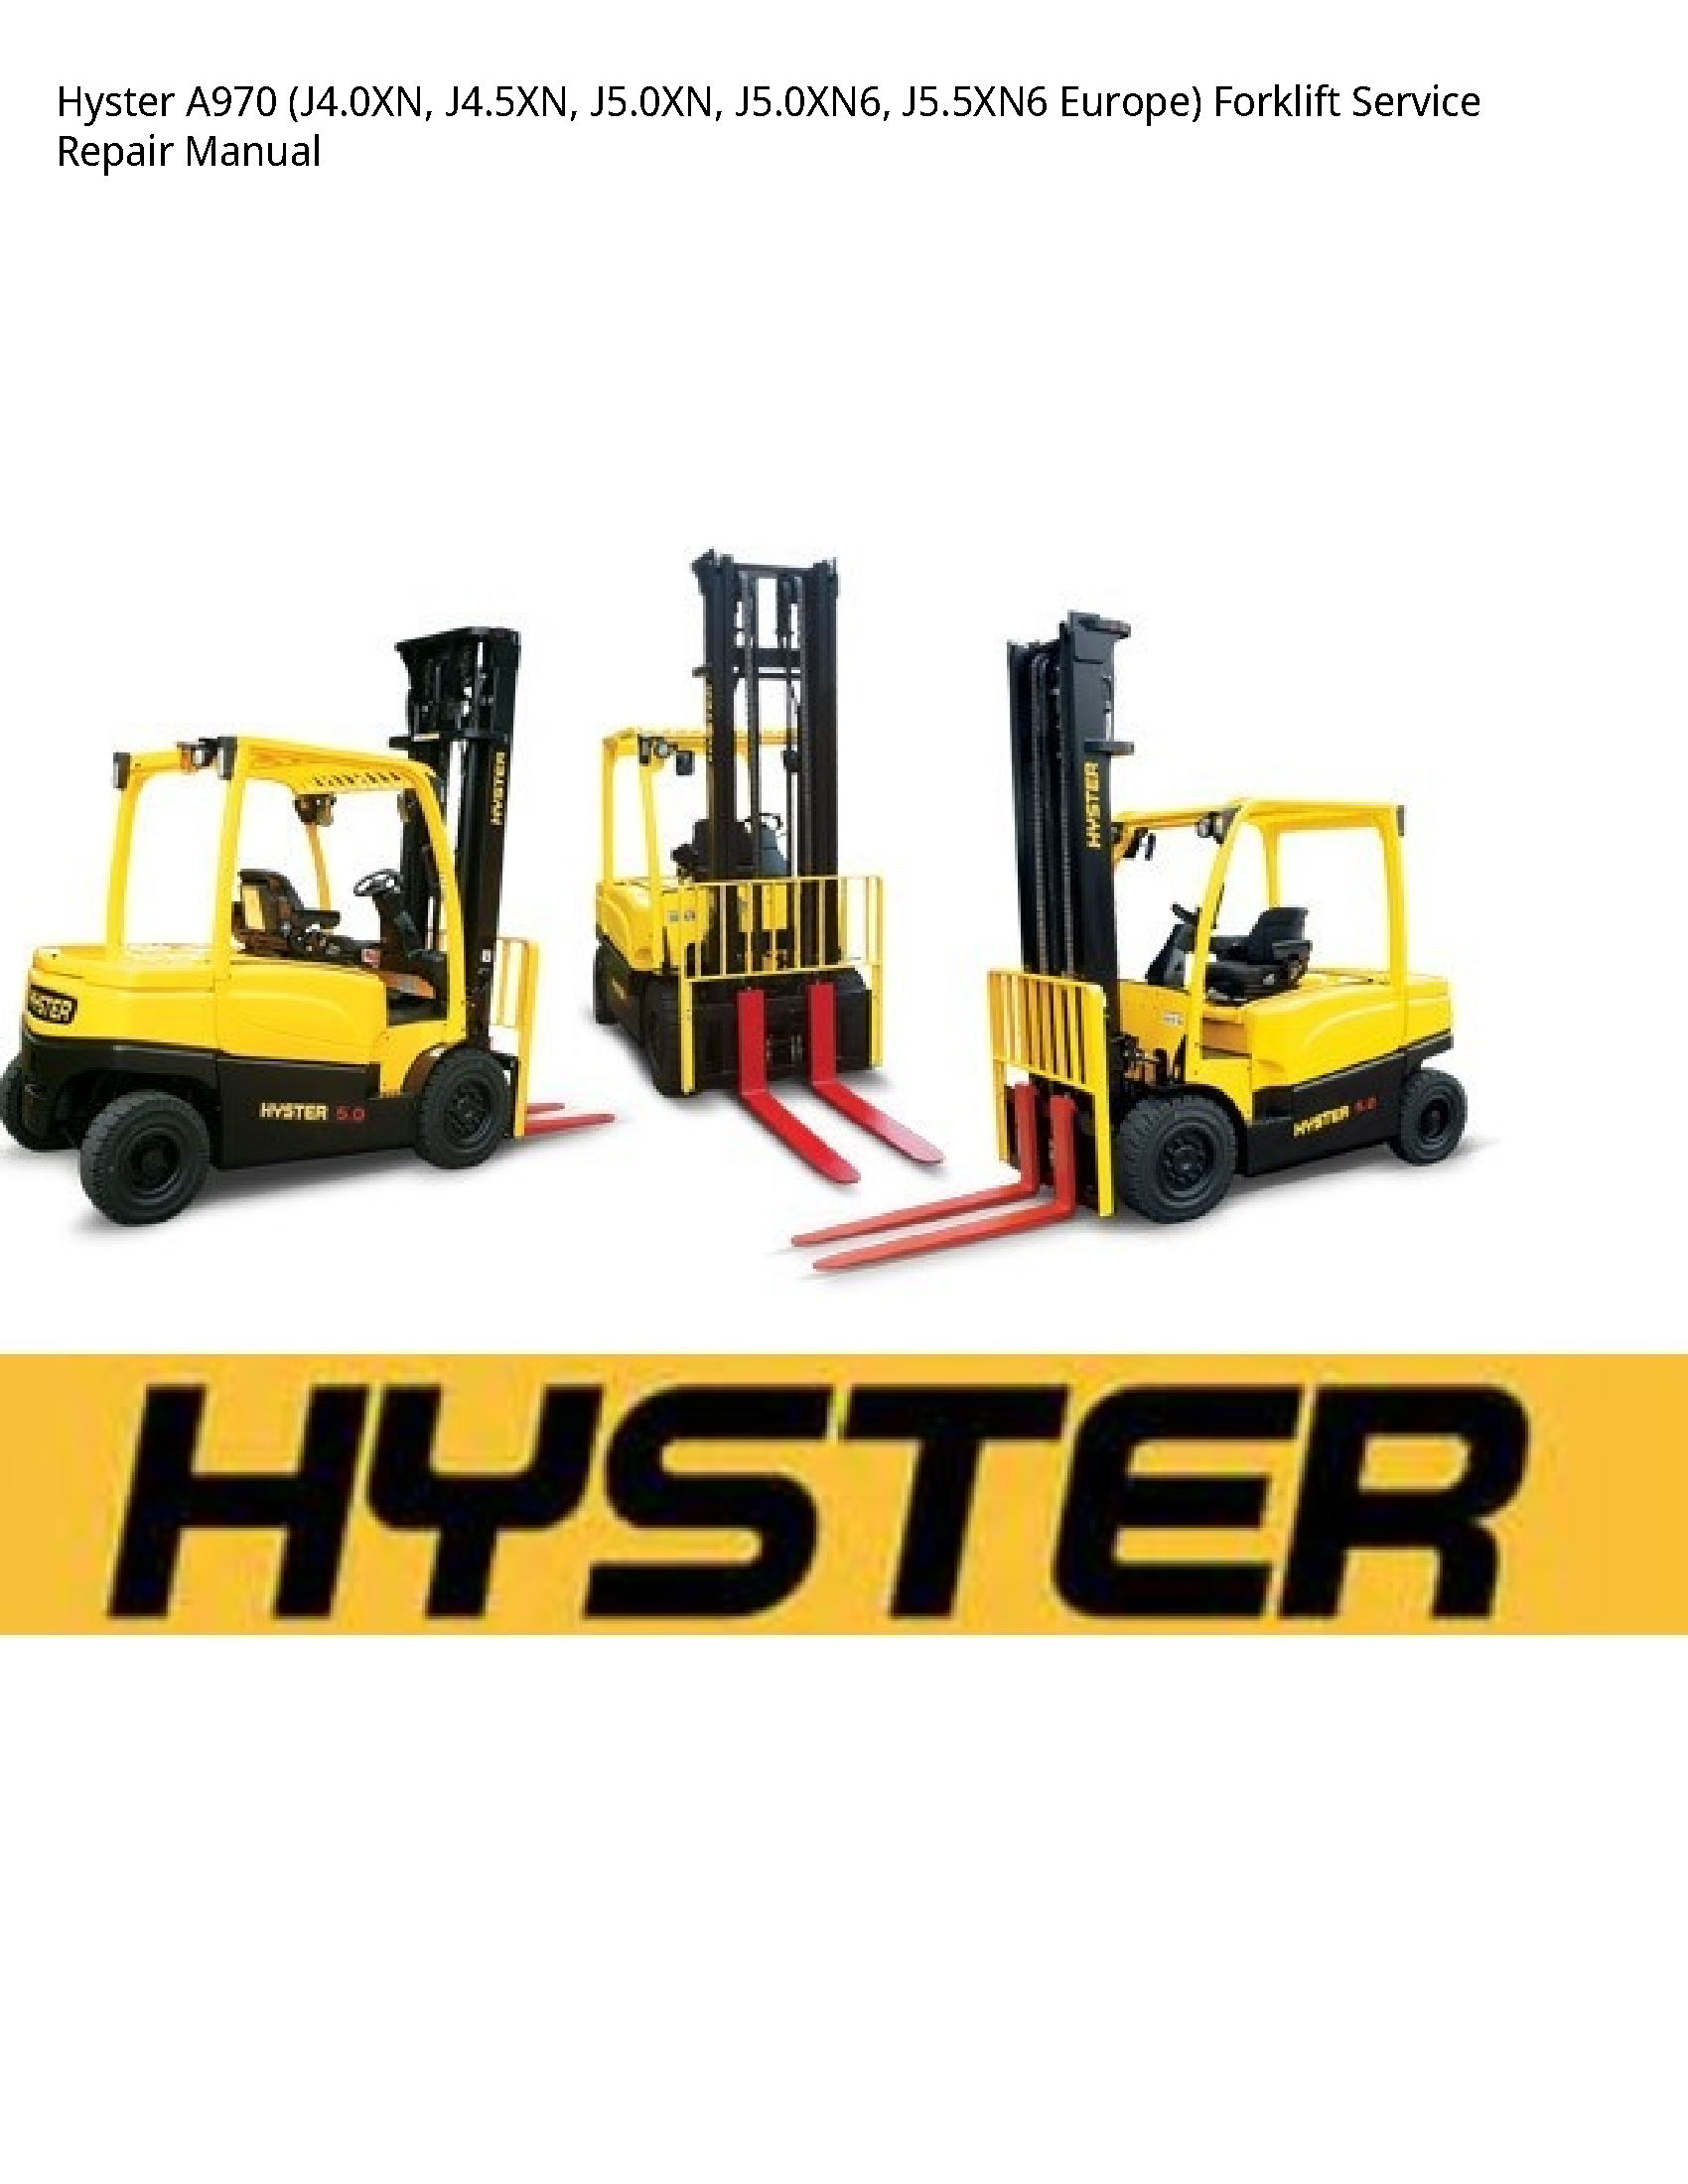 Hyster A970 Europe) Forklift manual